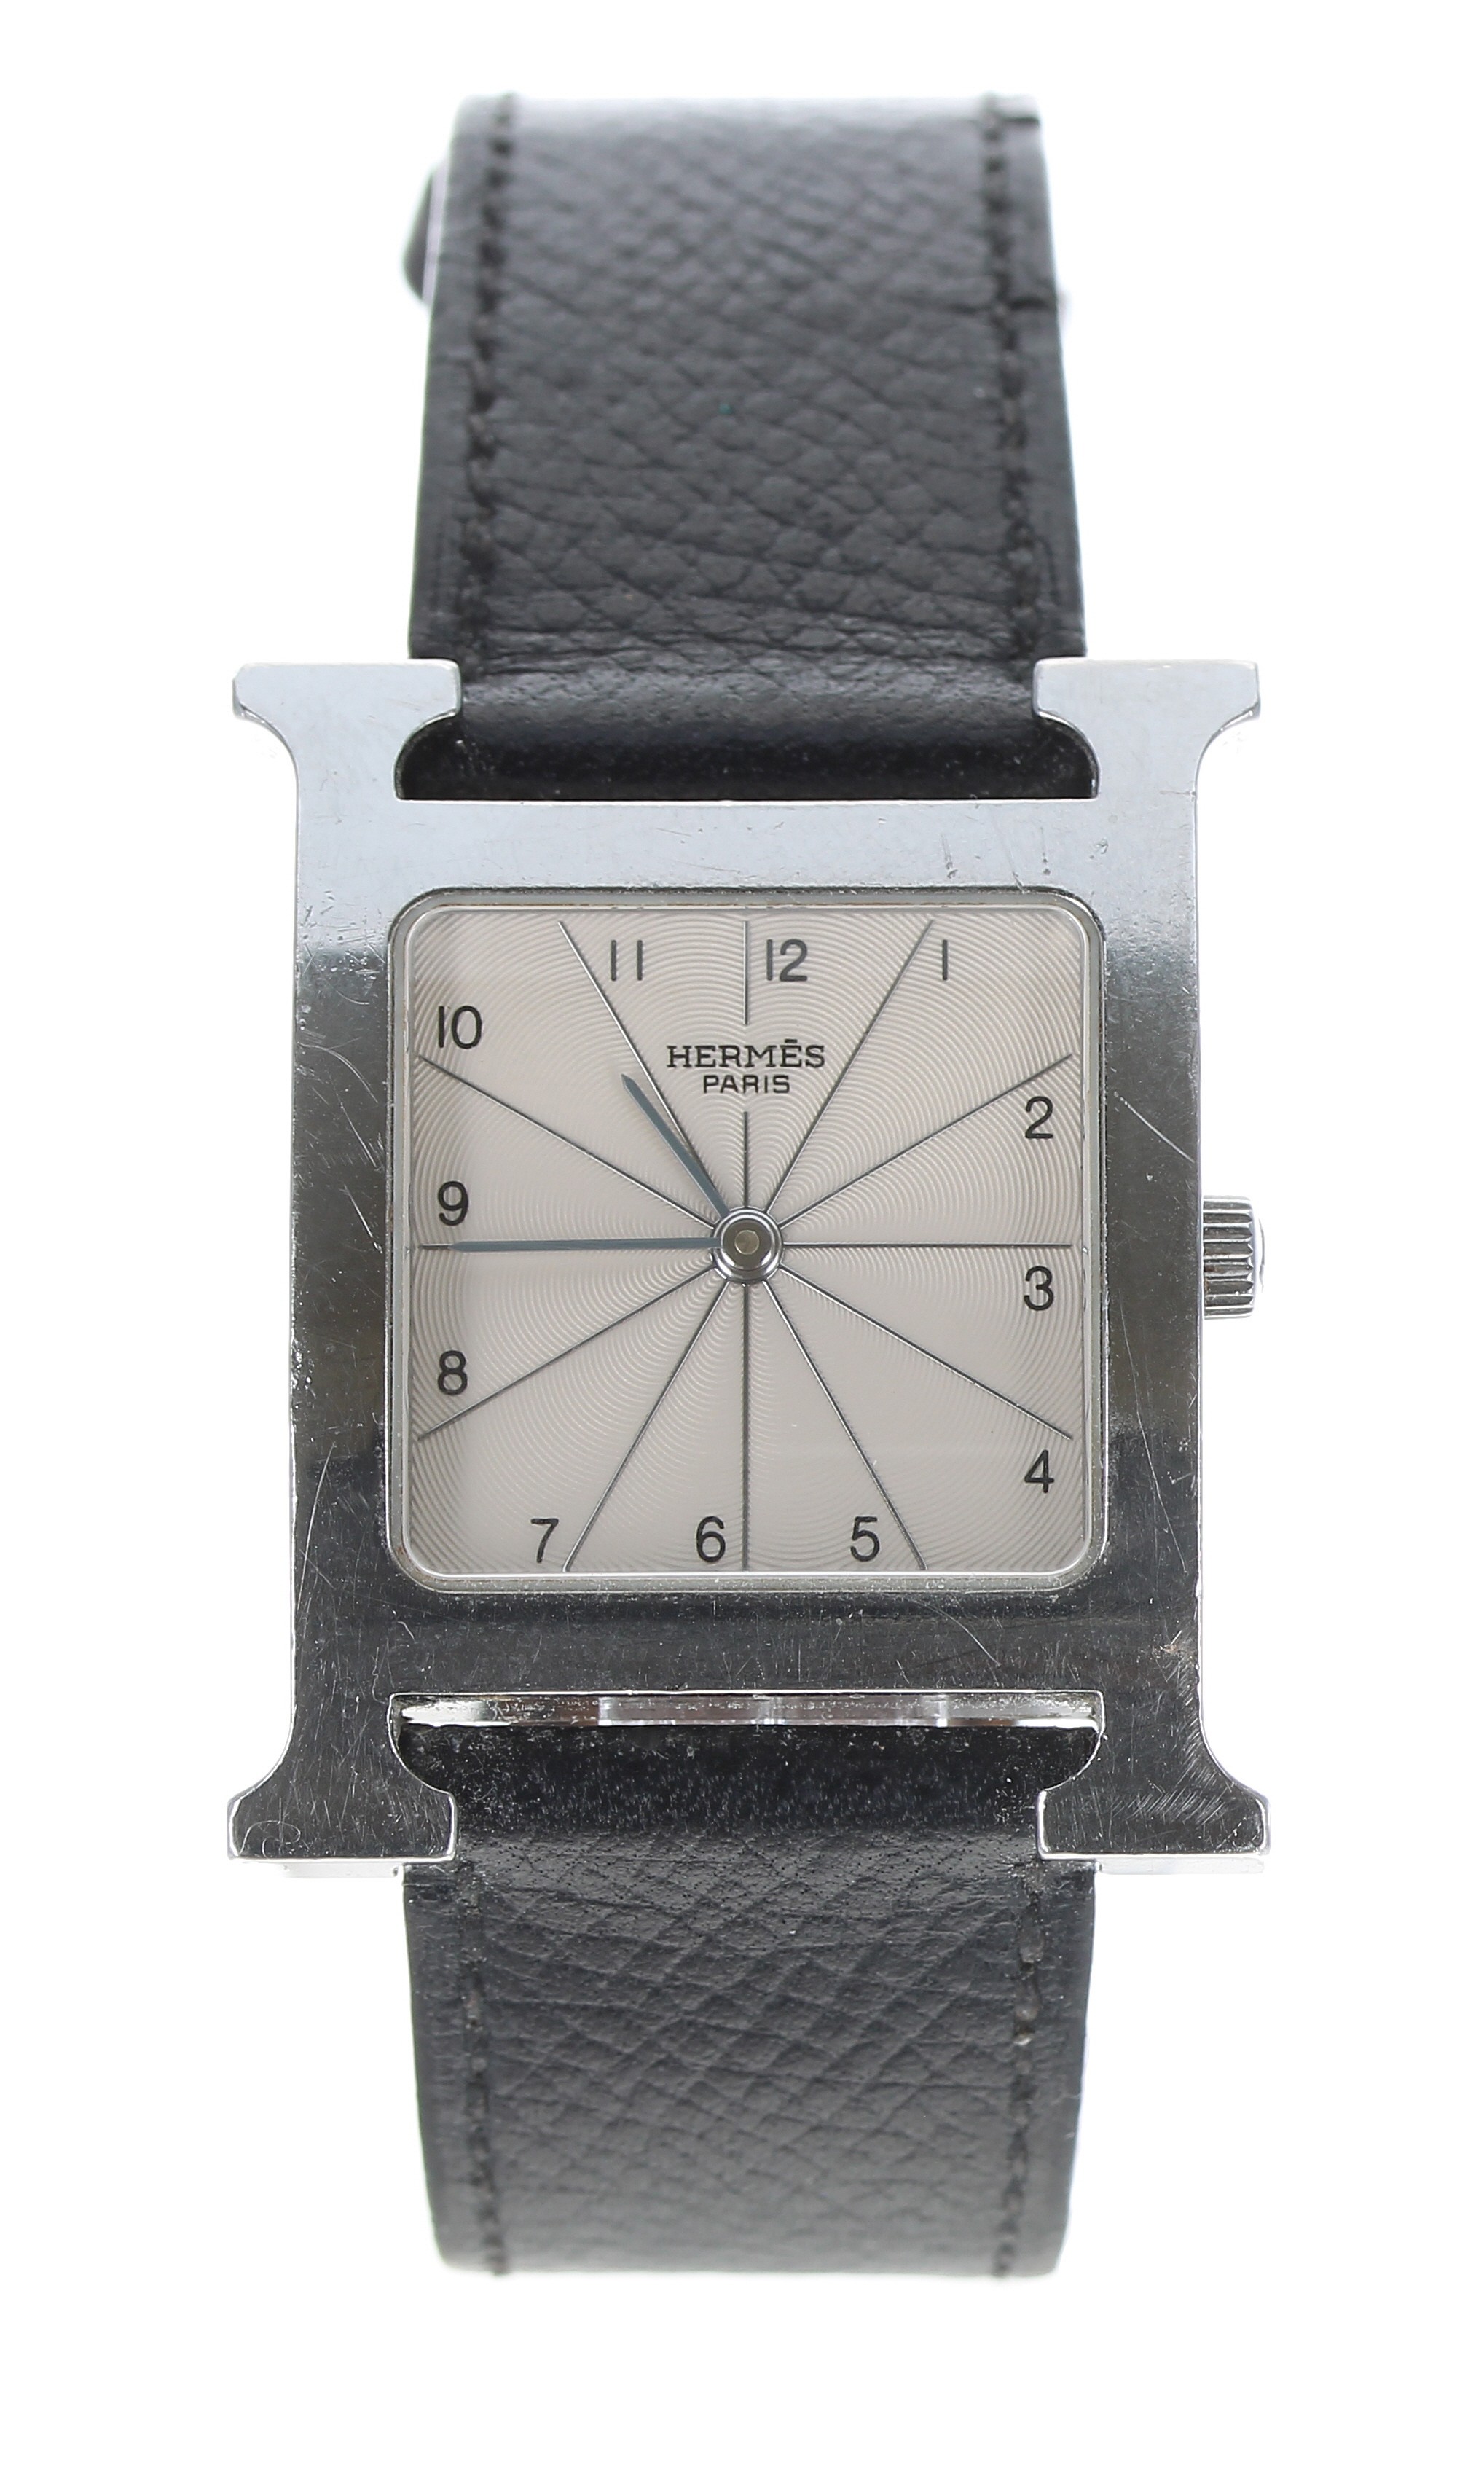 Hermes Paris Heure H stainless steel wristwatch, reference no. HH1.510, serial no. 2257xxx, square